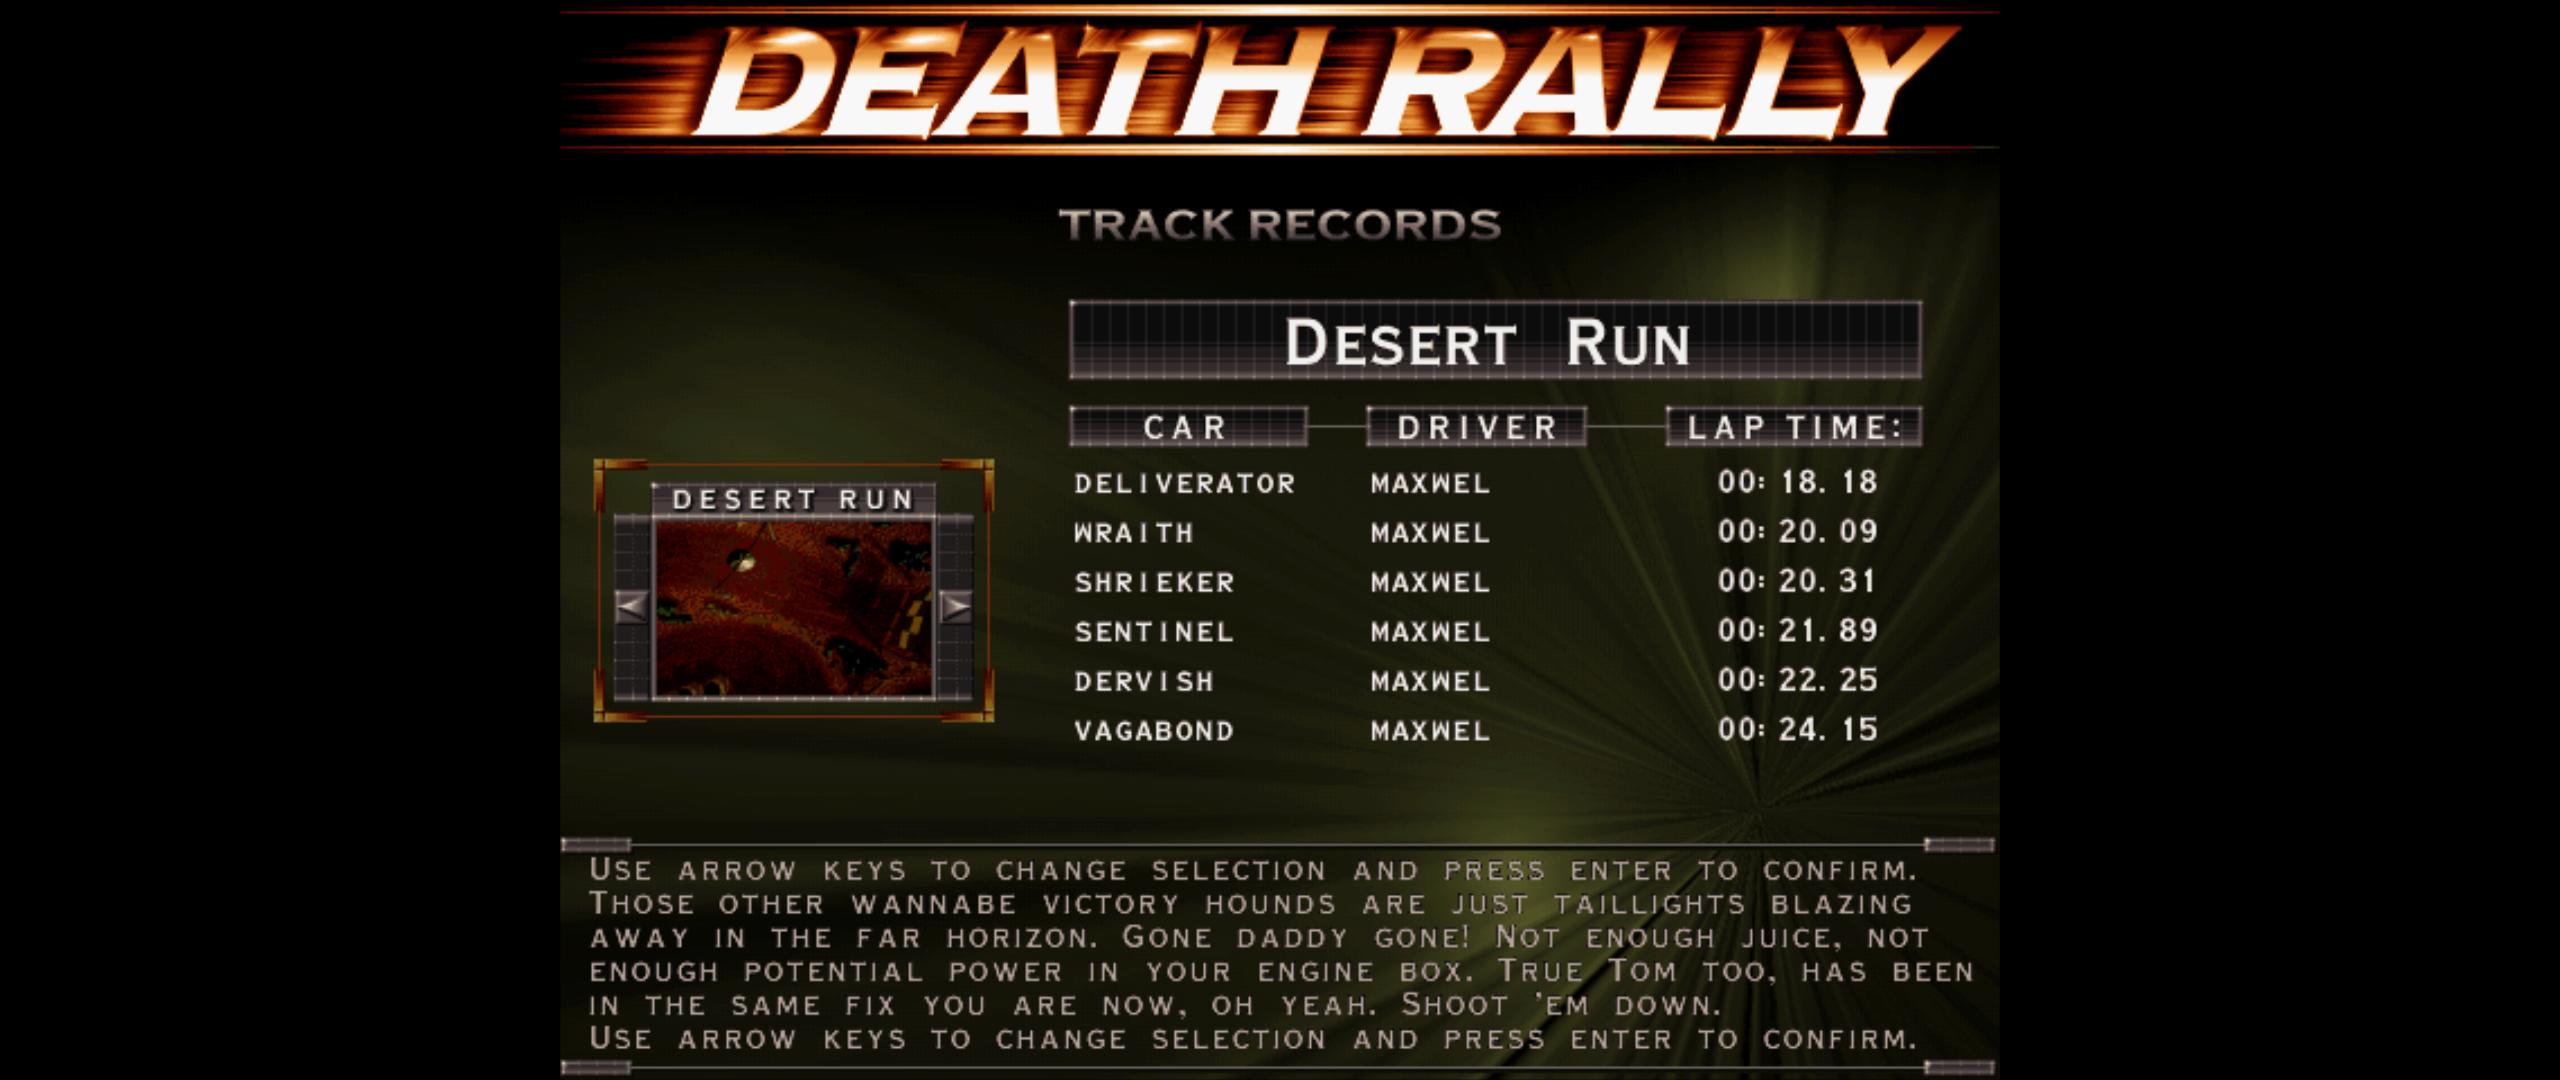 Maxwel: Death Rally [Desert Run, Deliverator Car] (PC) 0:00:18.18 points on 2016-03-04 05:59:41